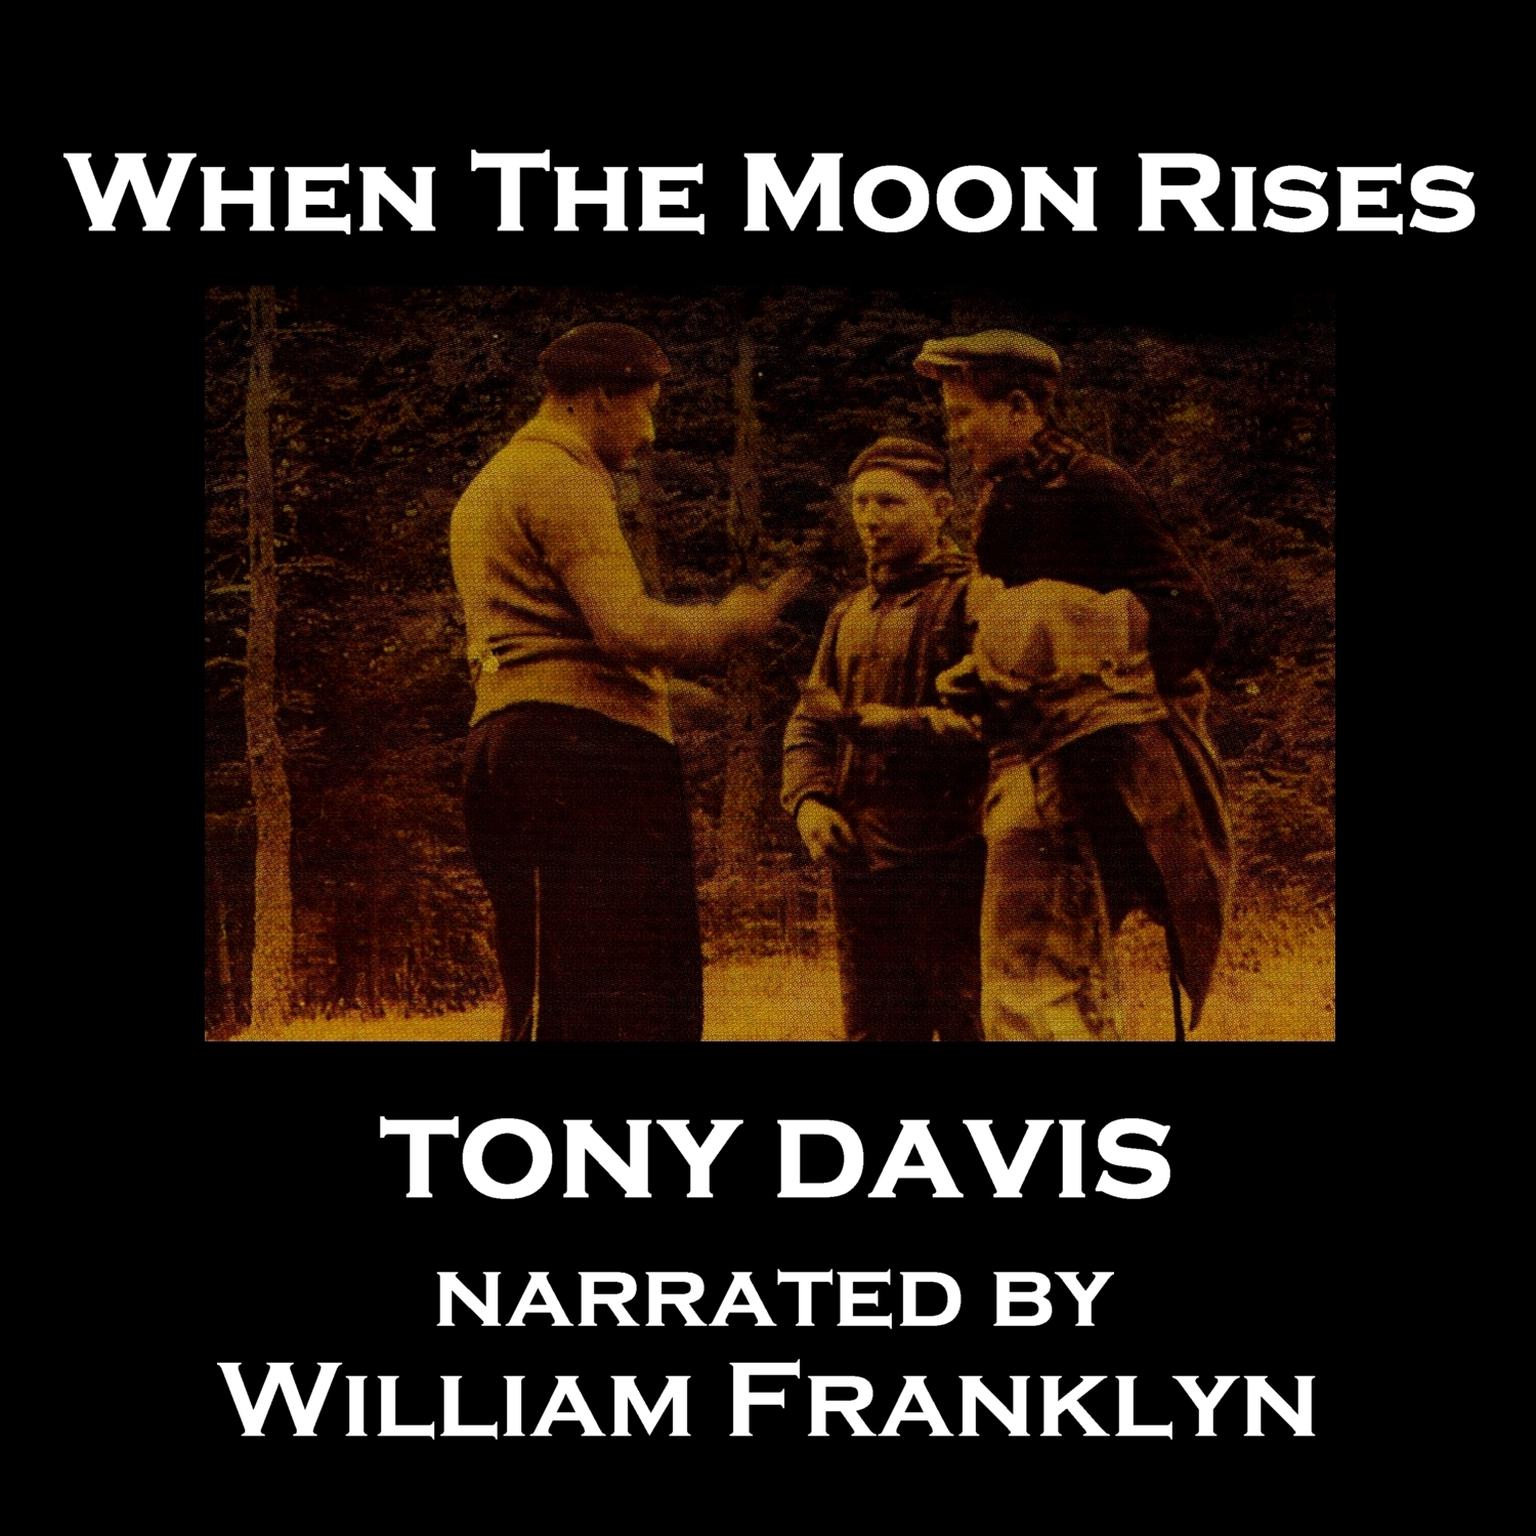 When the Moon Rises (Abridged) Audiobook, by Tony Davies